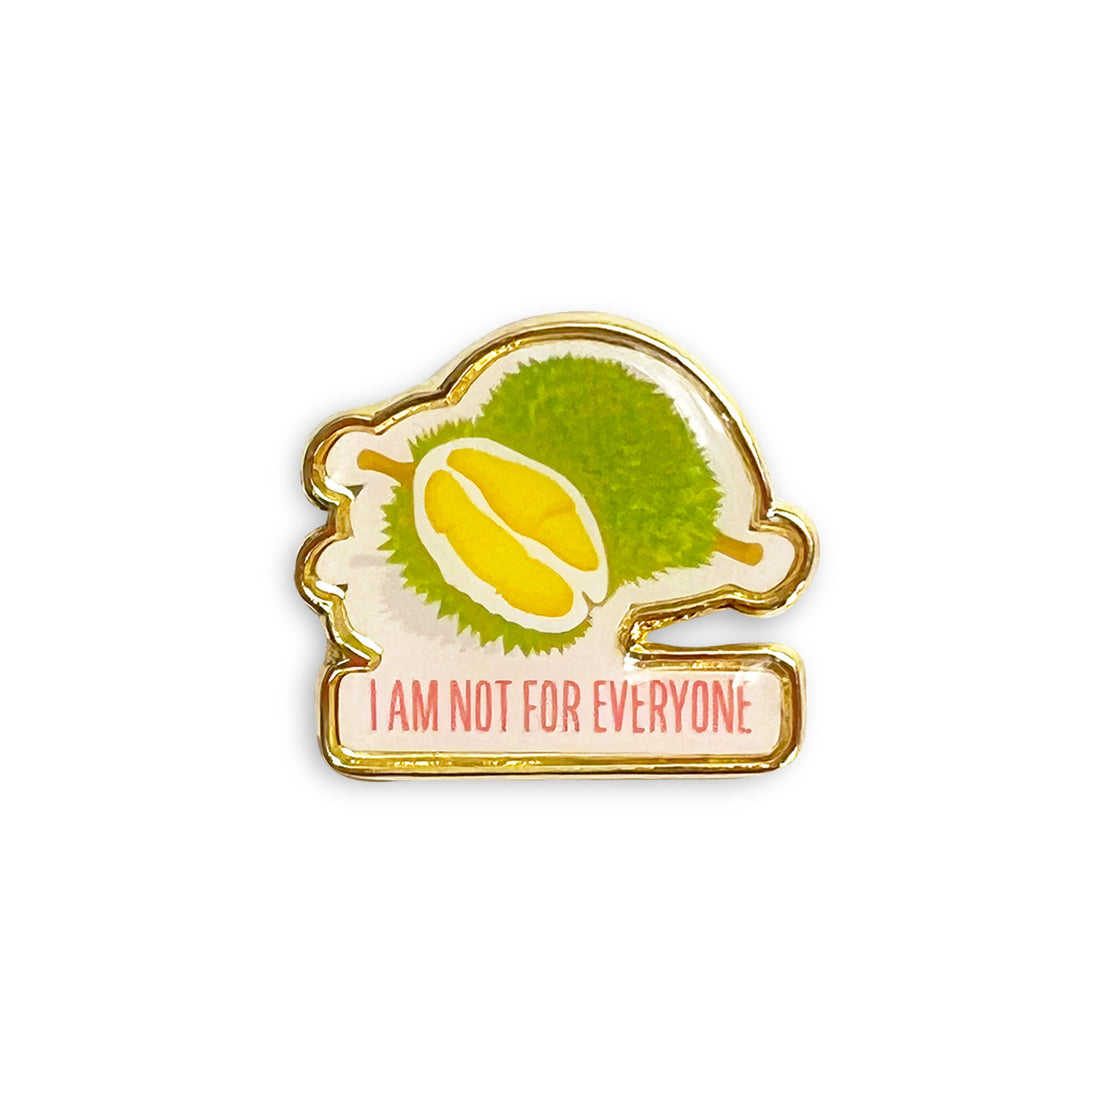 I am not for everyone durian lapel pin by I&